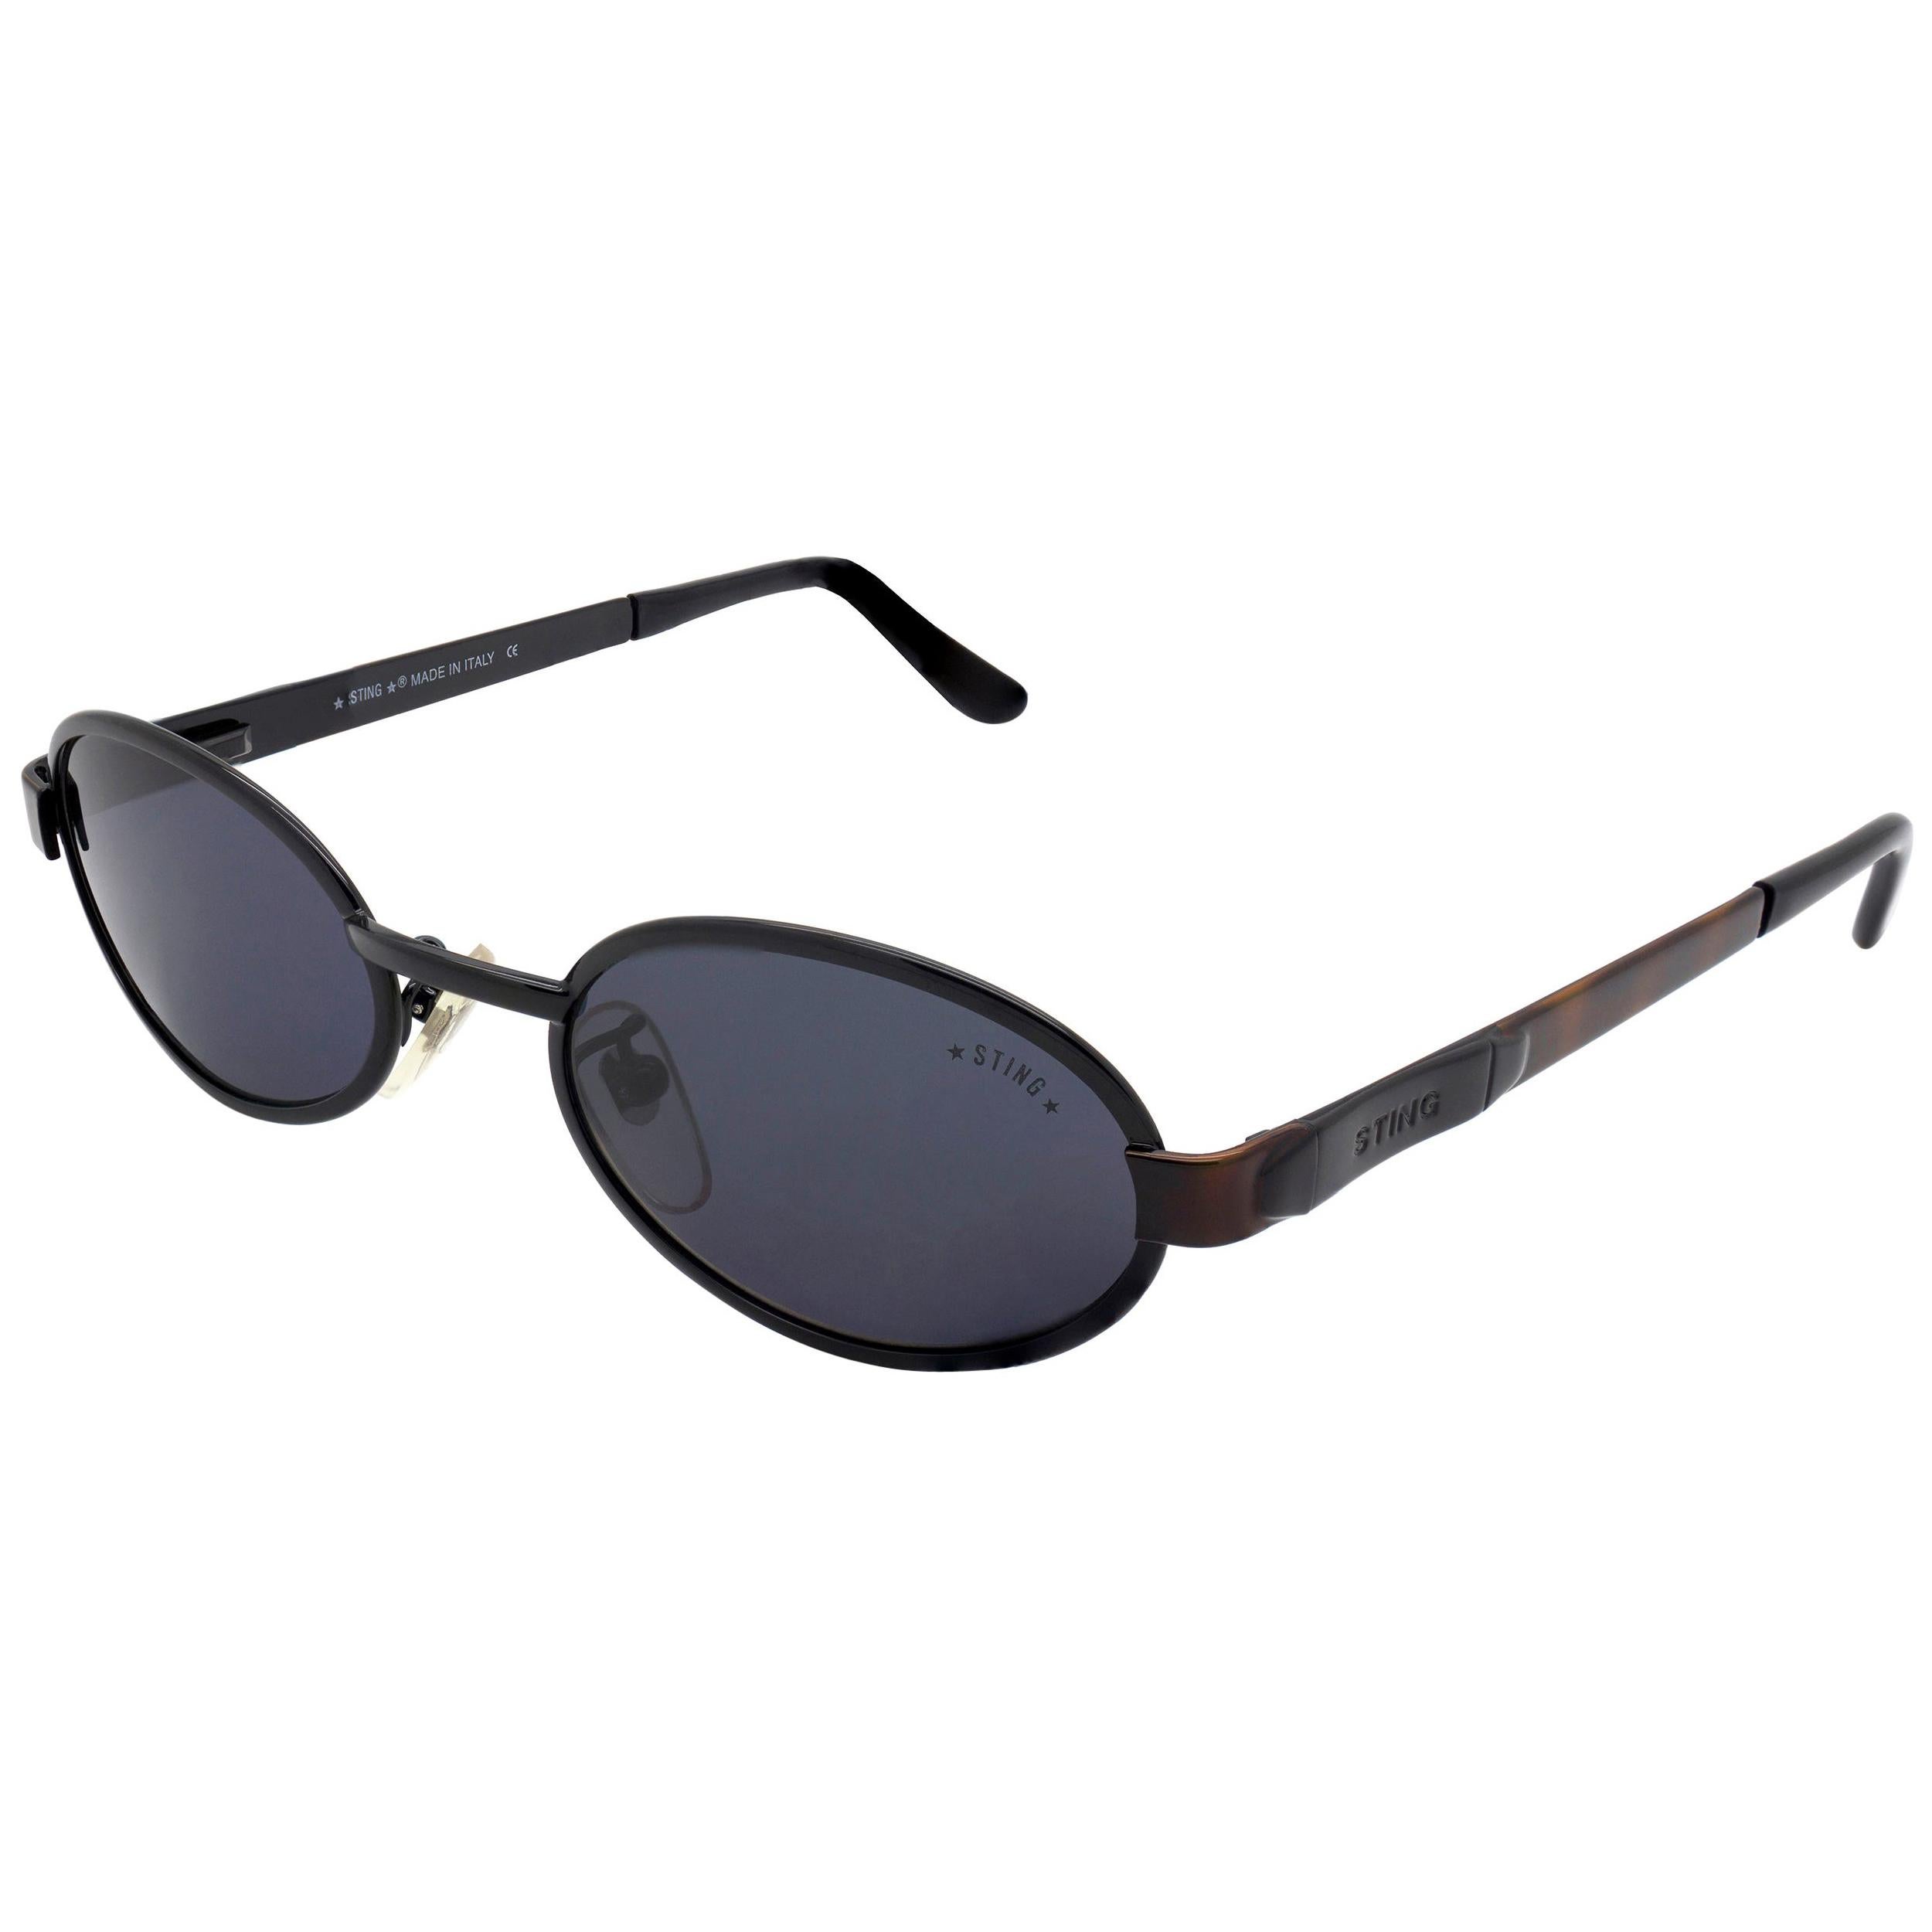 Sting sunglasses spring hinges, Italy  For Sale